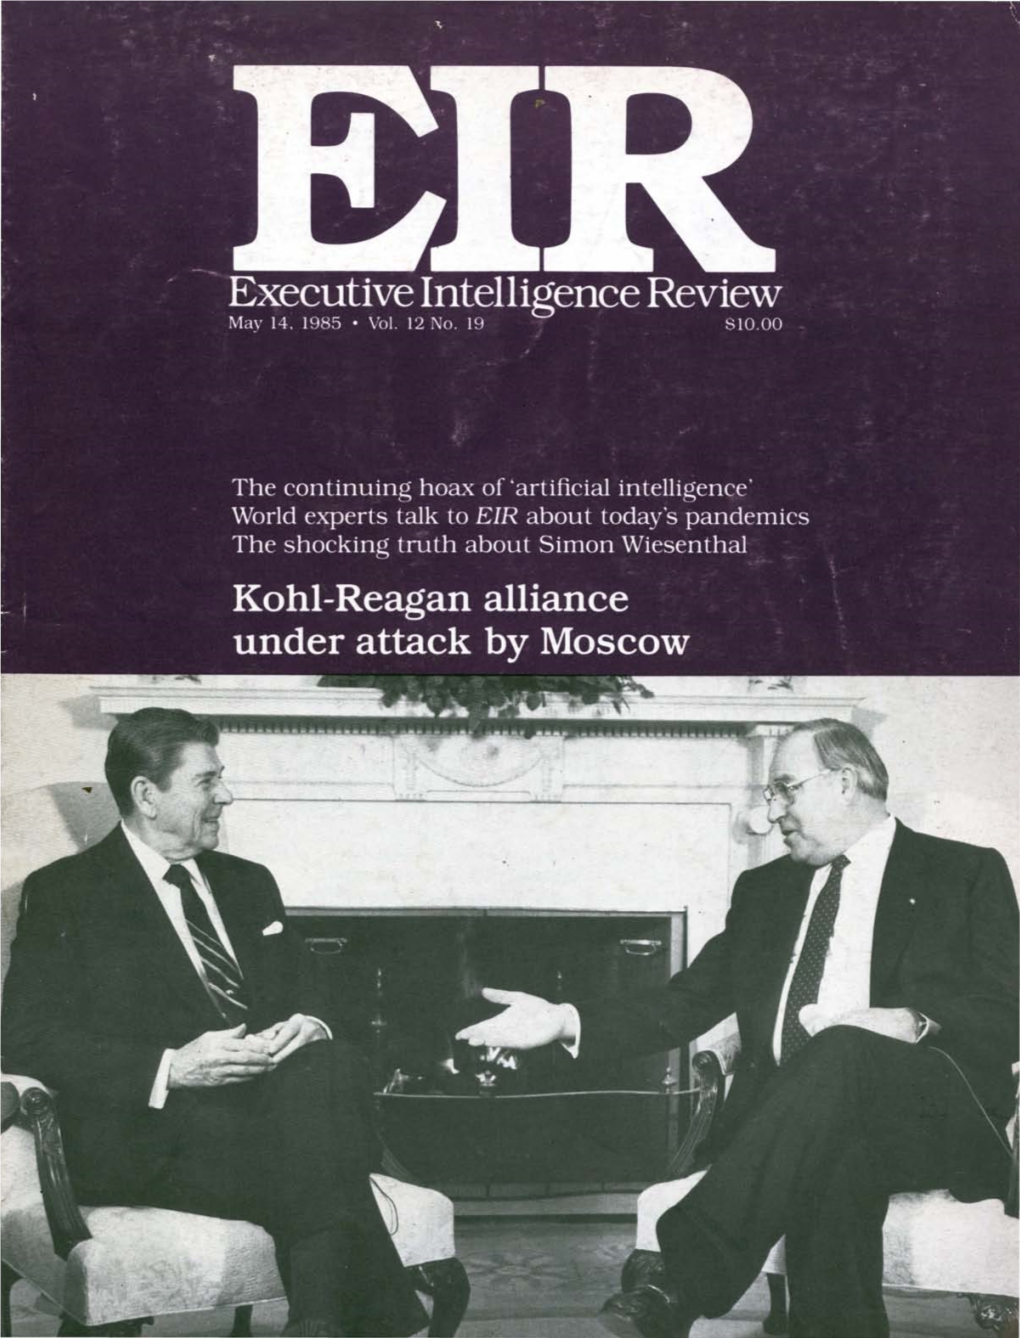 Executive Intelligence Review, Volume 12, Number 19, May 14, 1985